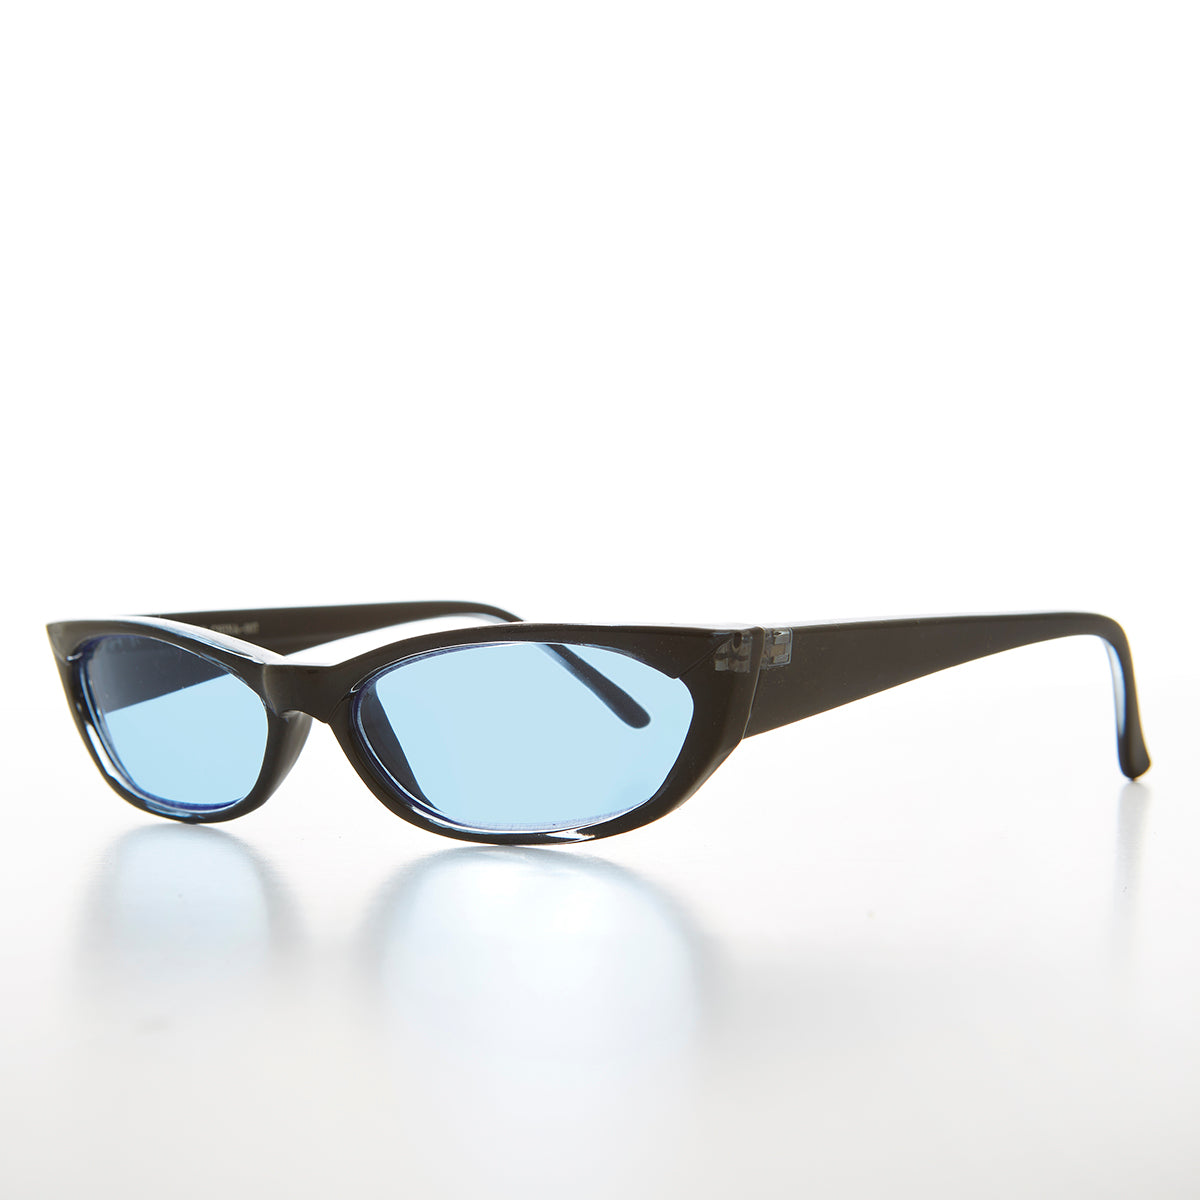 Mod Cat Eye Sunglass with Tinted Lenses